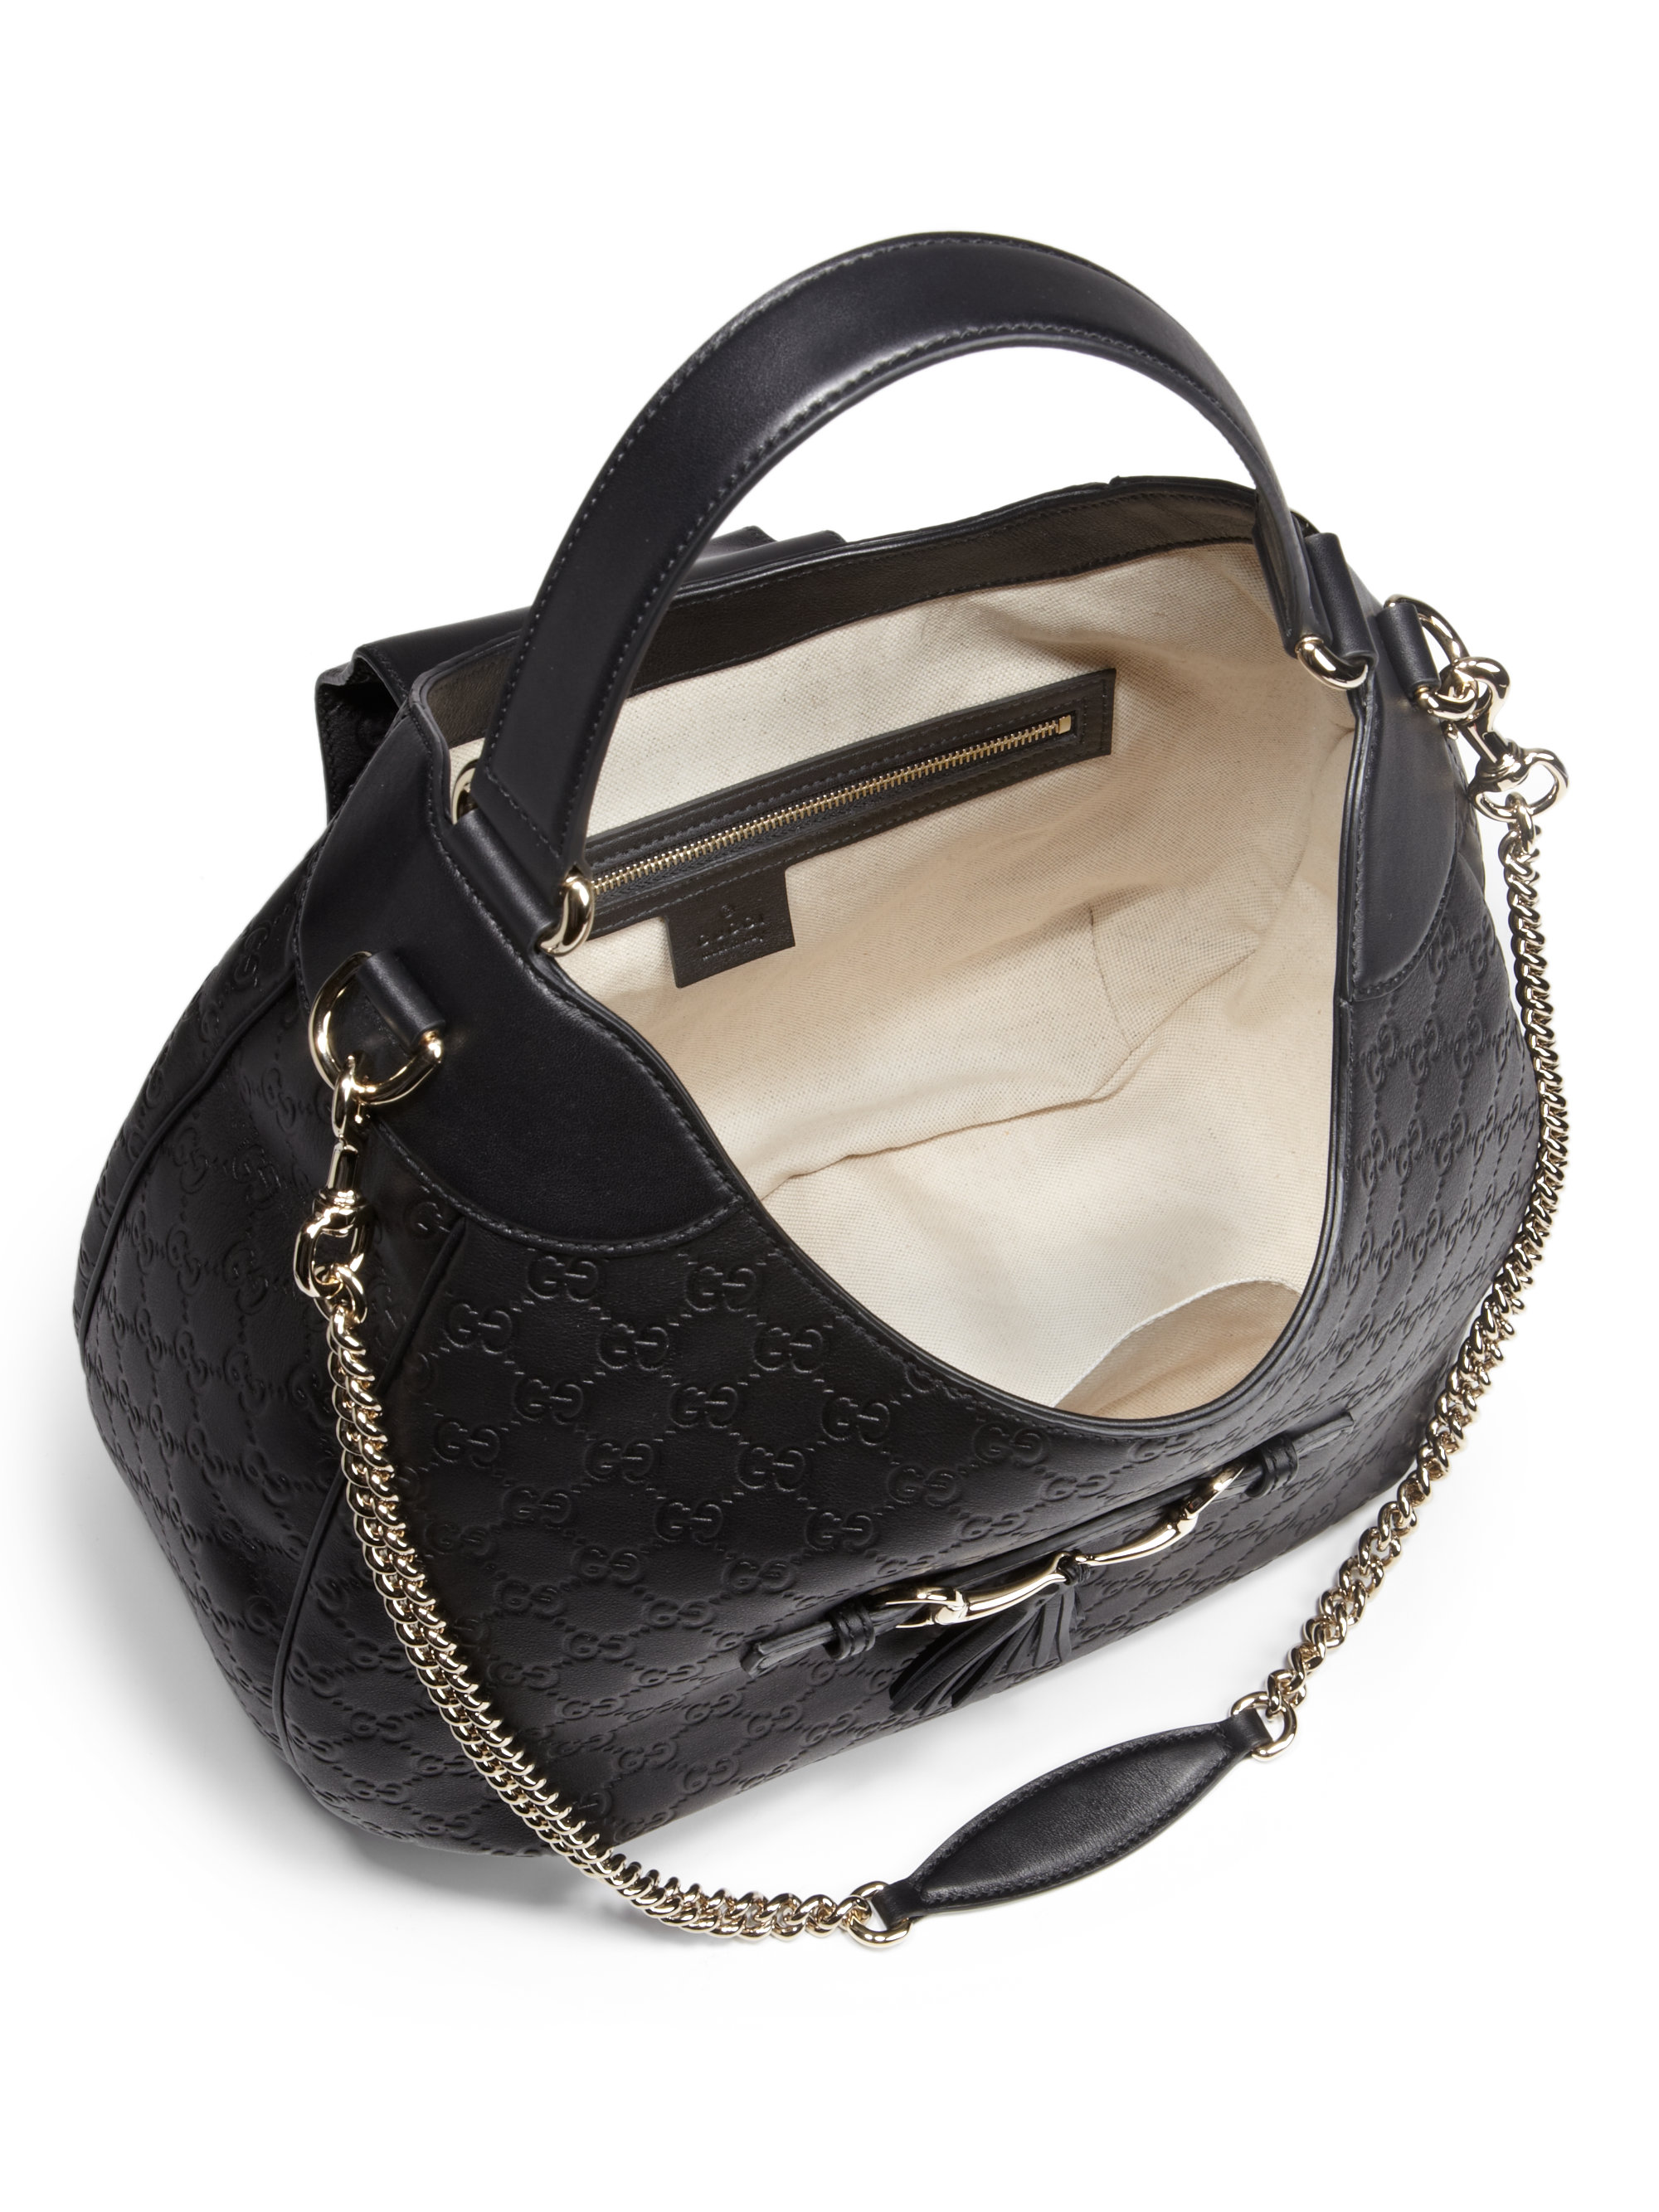 Gucci Emily Leather Hobo in Black - Lyst